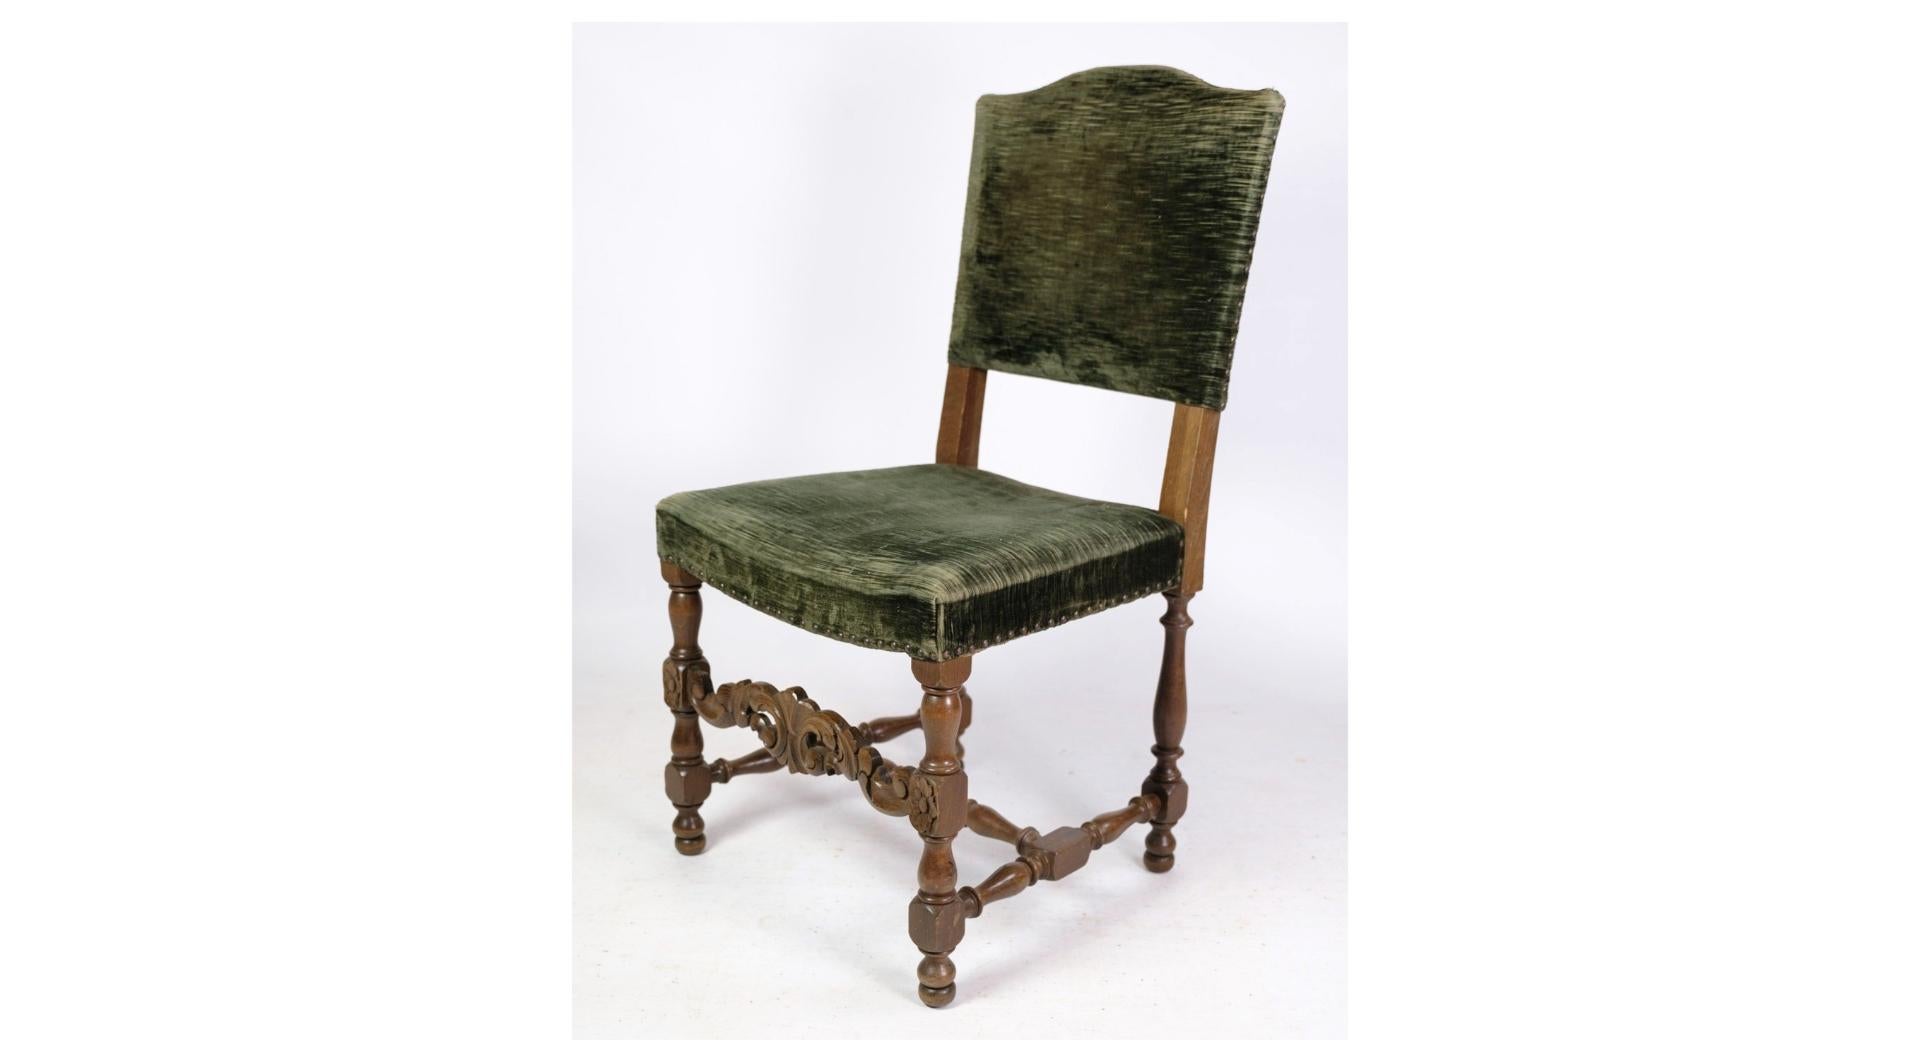 
The two oak chairs in Renaissance style, upholstered with green velour fabric from the 1930s, are exquisite examples of vintage furniture with timeless appeal. These chairs feature a classic Renaissance design, characterized by their ornate